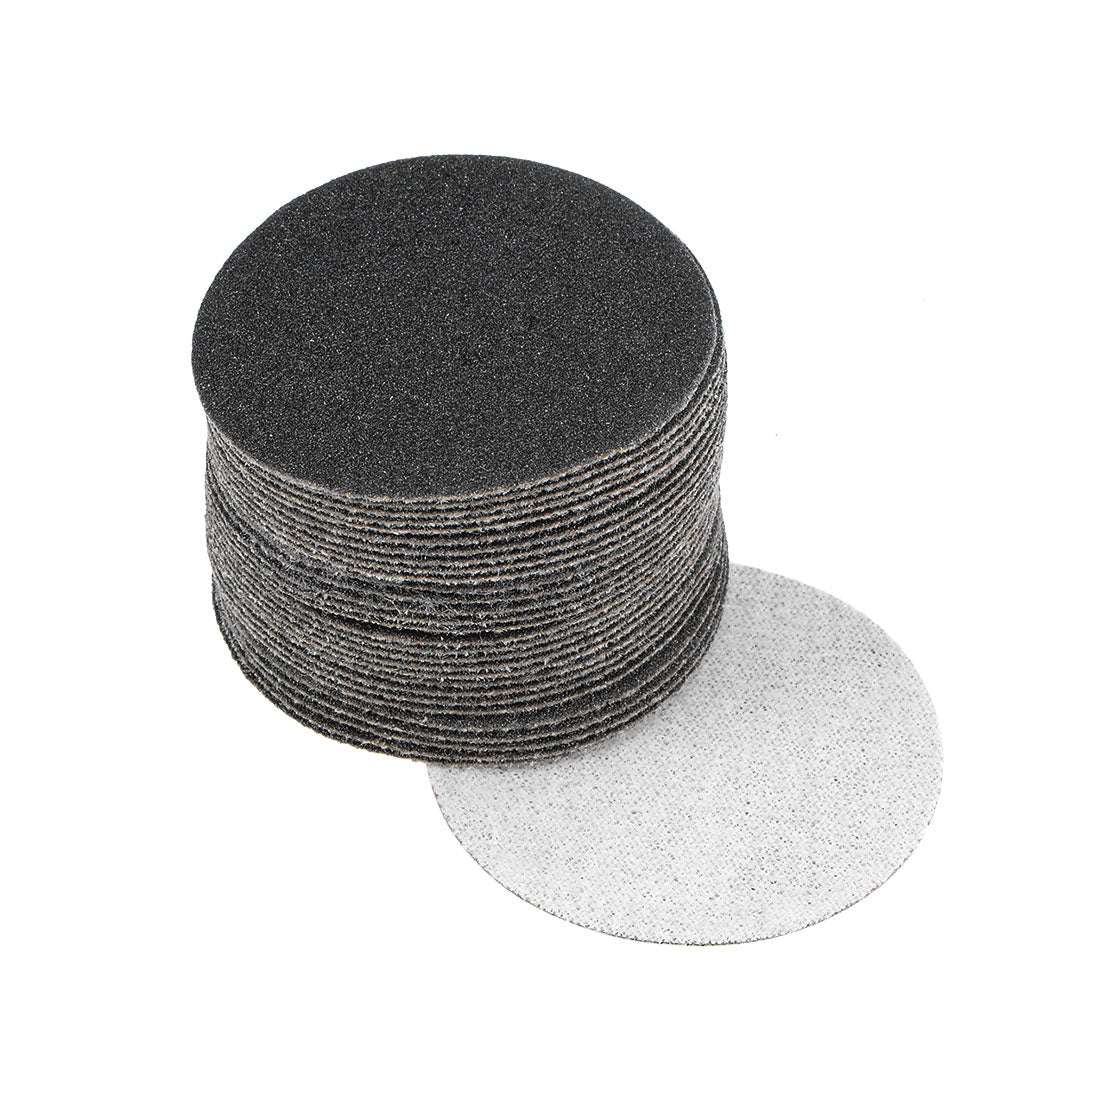 Uxcell Uxcell 2 inch Wet Dry Disc 400 Grit Hook and Loop Sanding Disc Silicon Carbide 30pcs